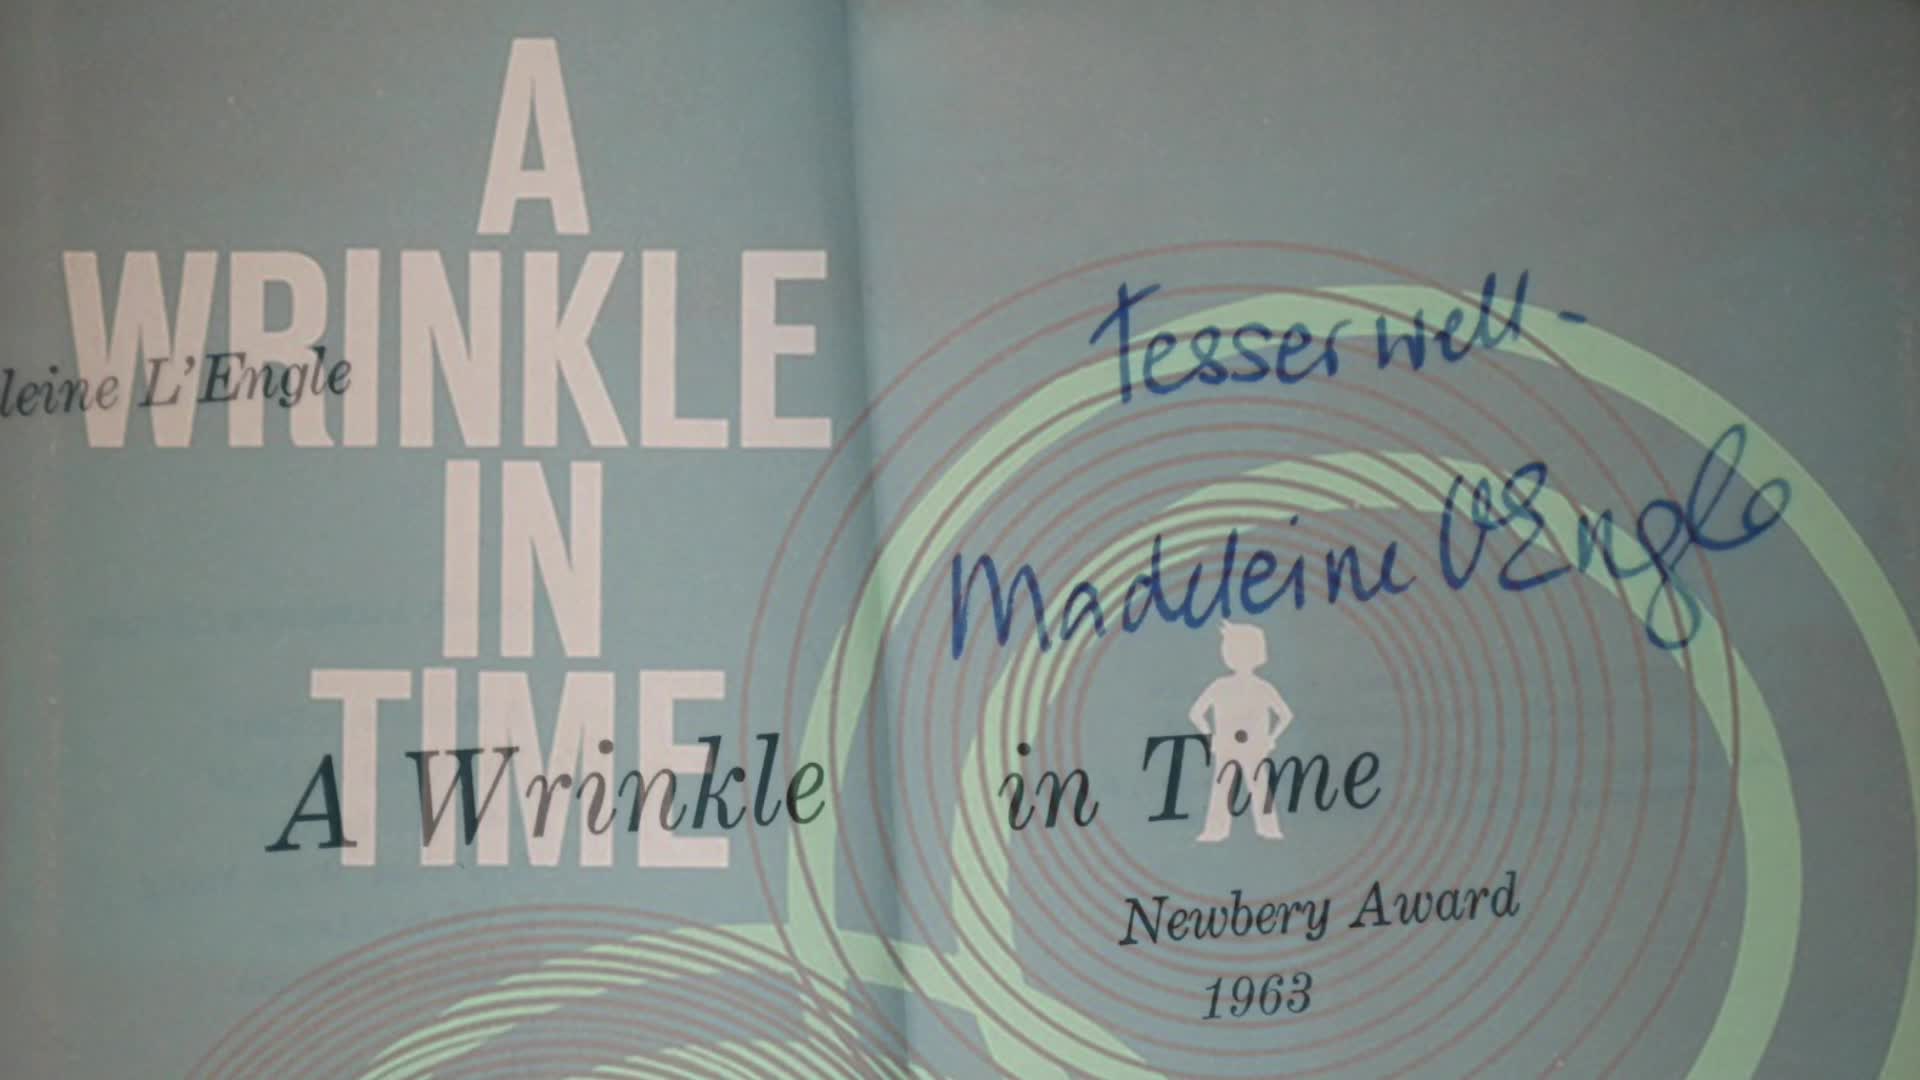 Madeleine L’Engle at 100: Tessering Into Another Century